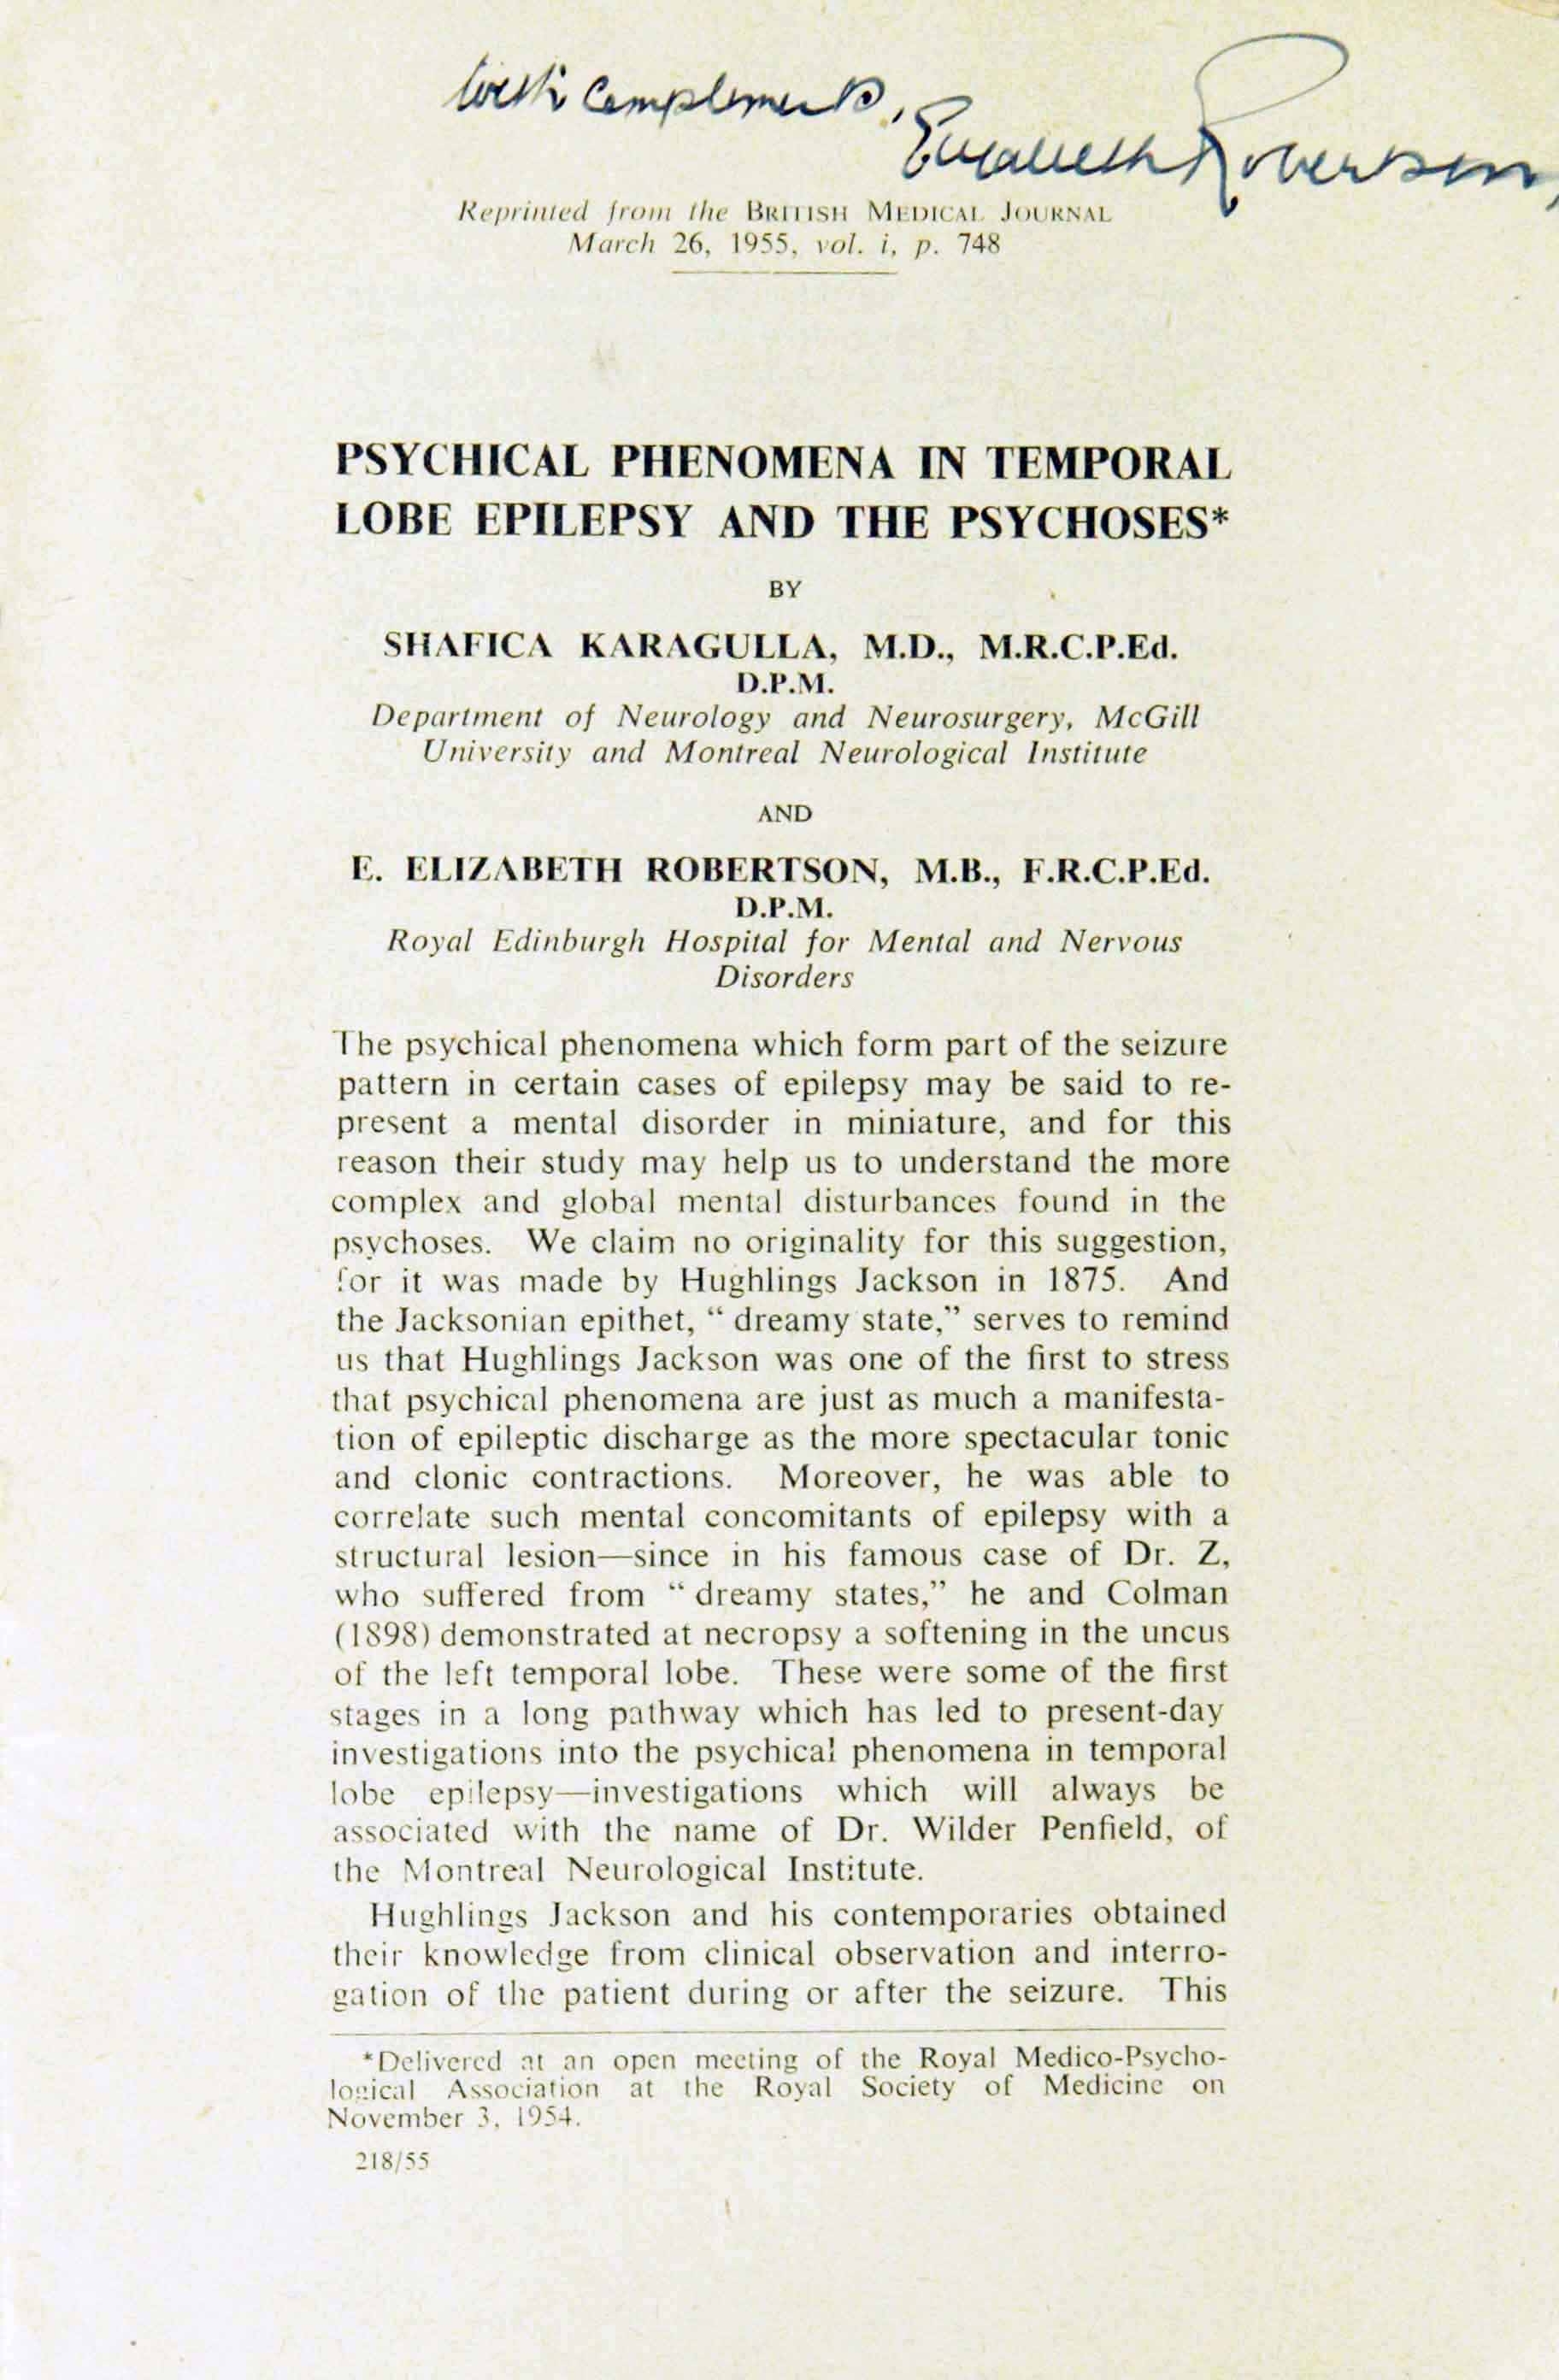 First page of Dr Robertson's article on epilepsy, 1955